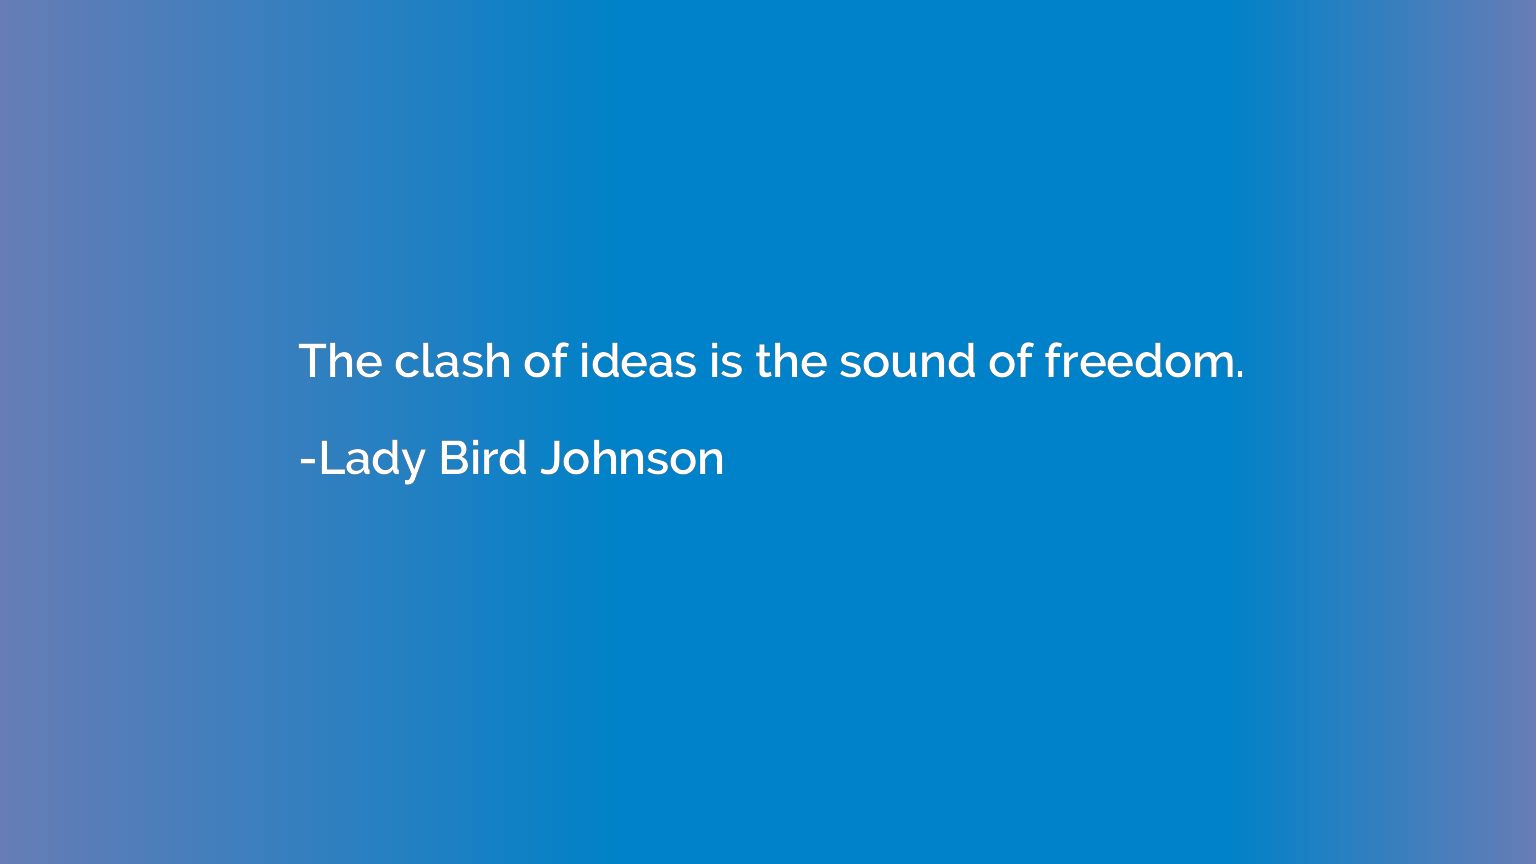 The clash of ideas is the sound of freedom.